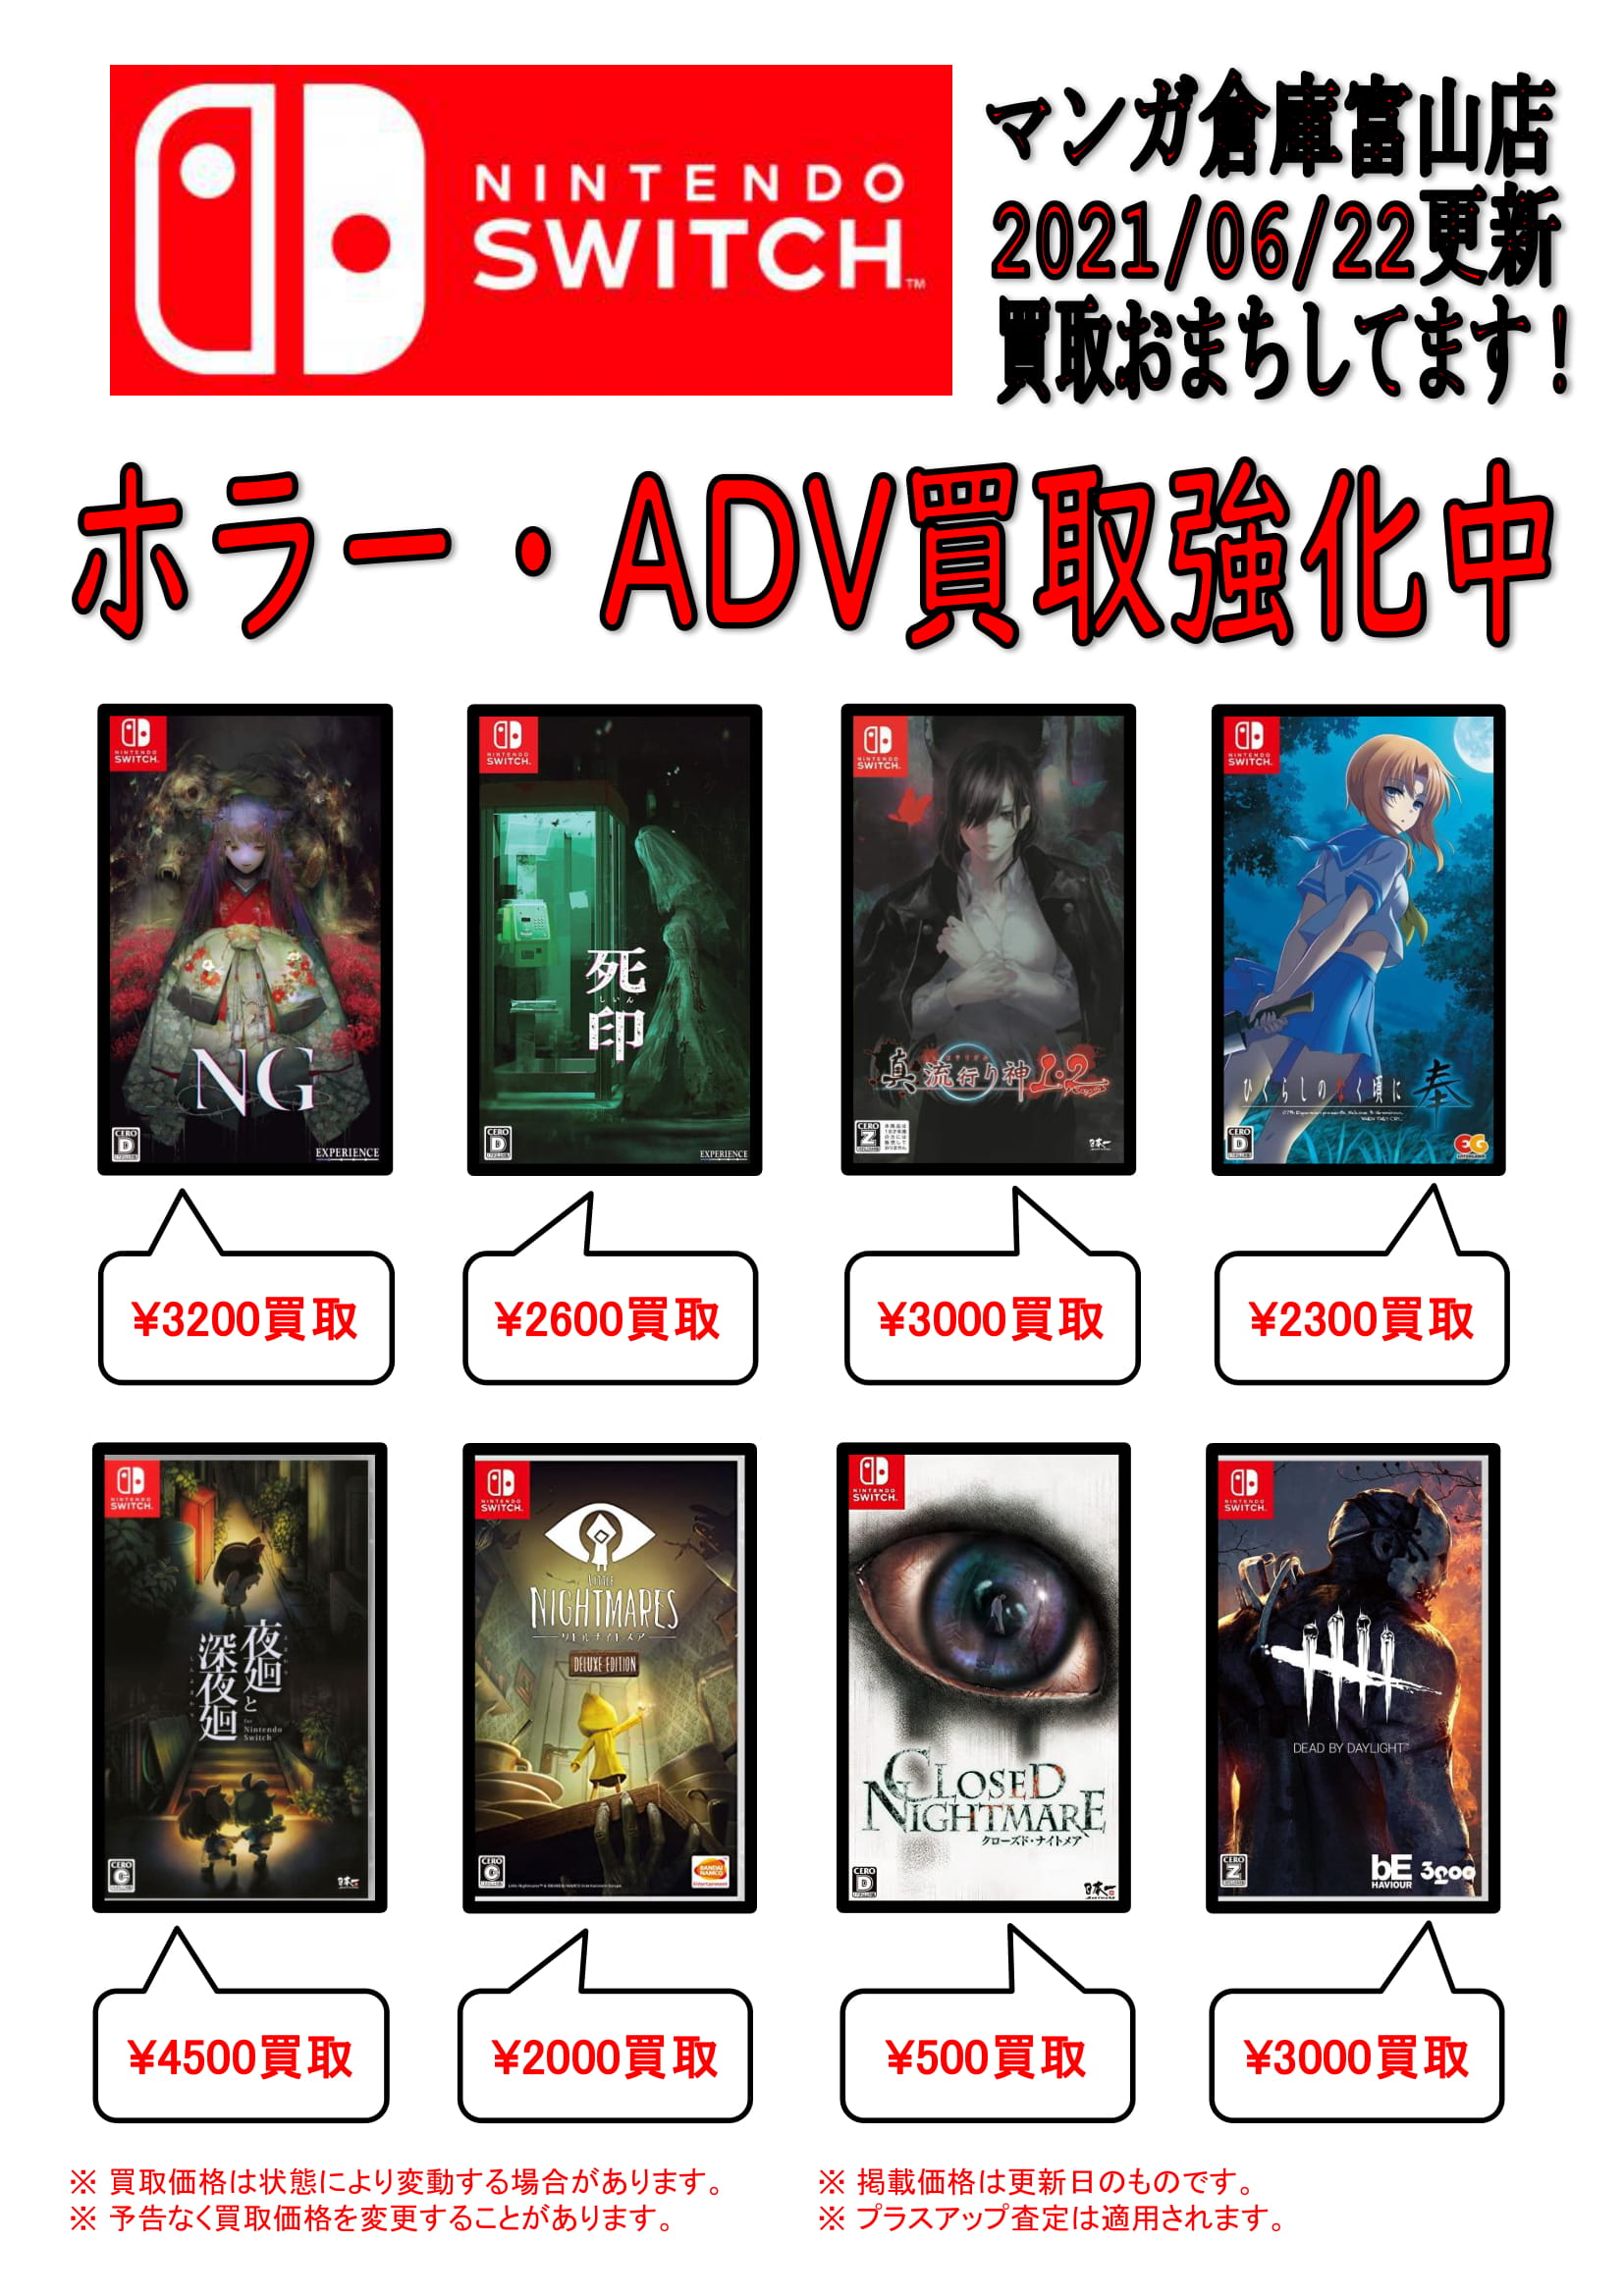 6/22★〈Switchソフト〉買取告知更新しました！★ | マンガ倉庫 富山店